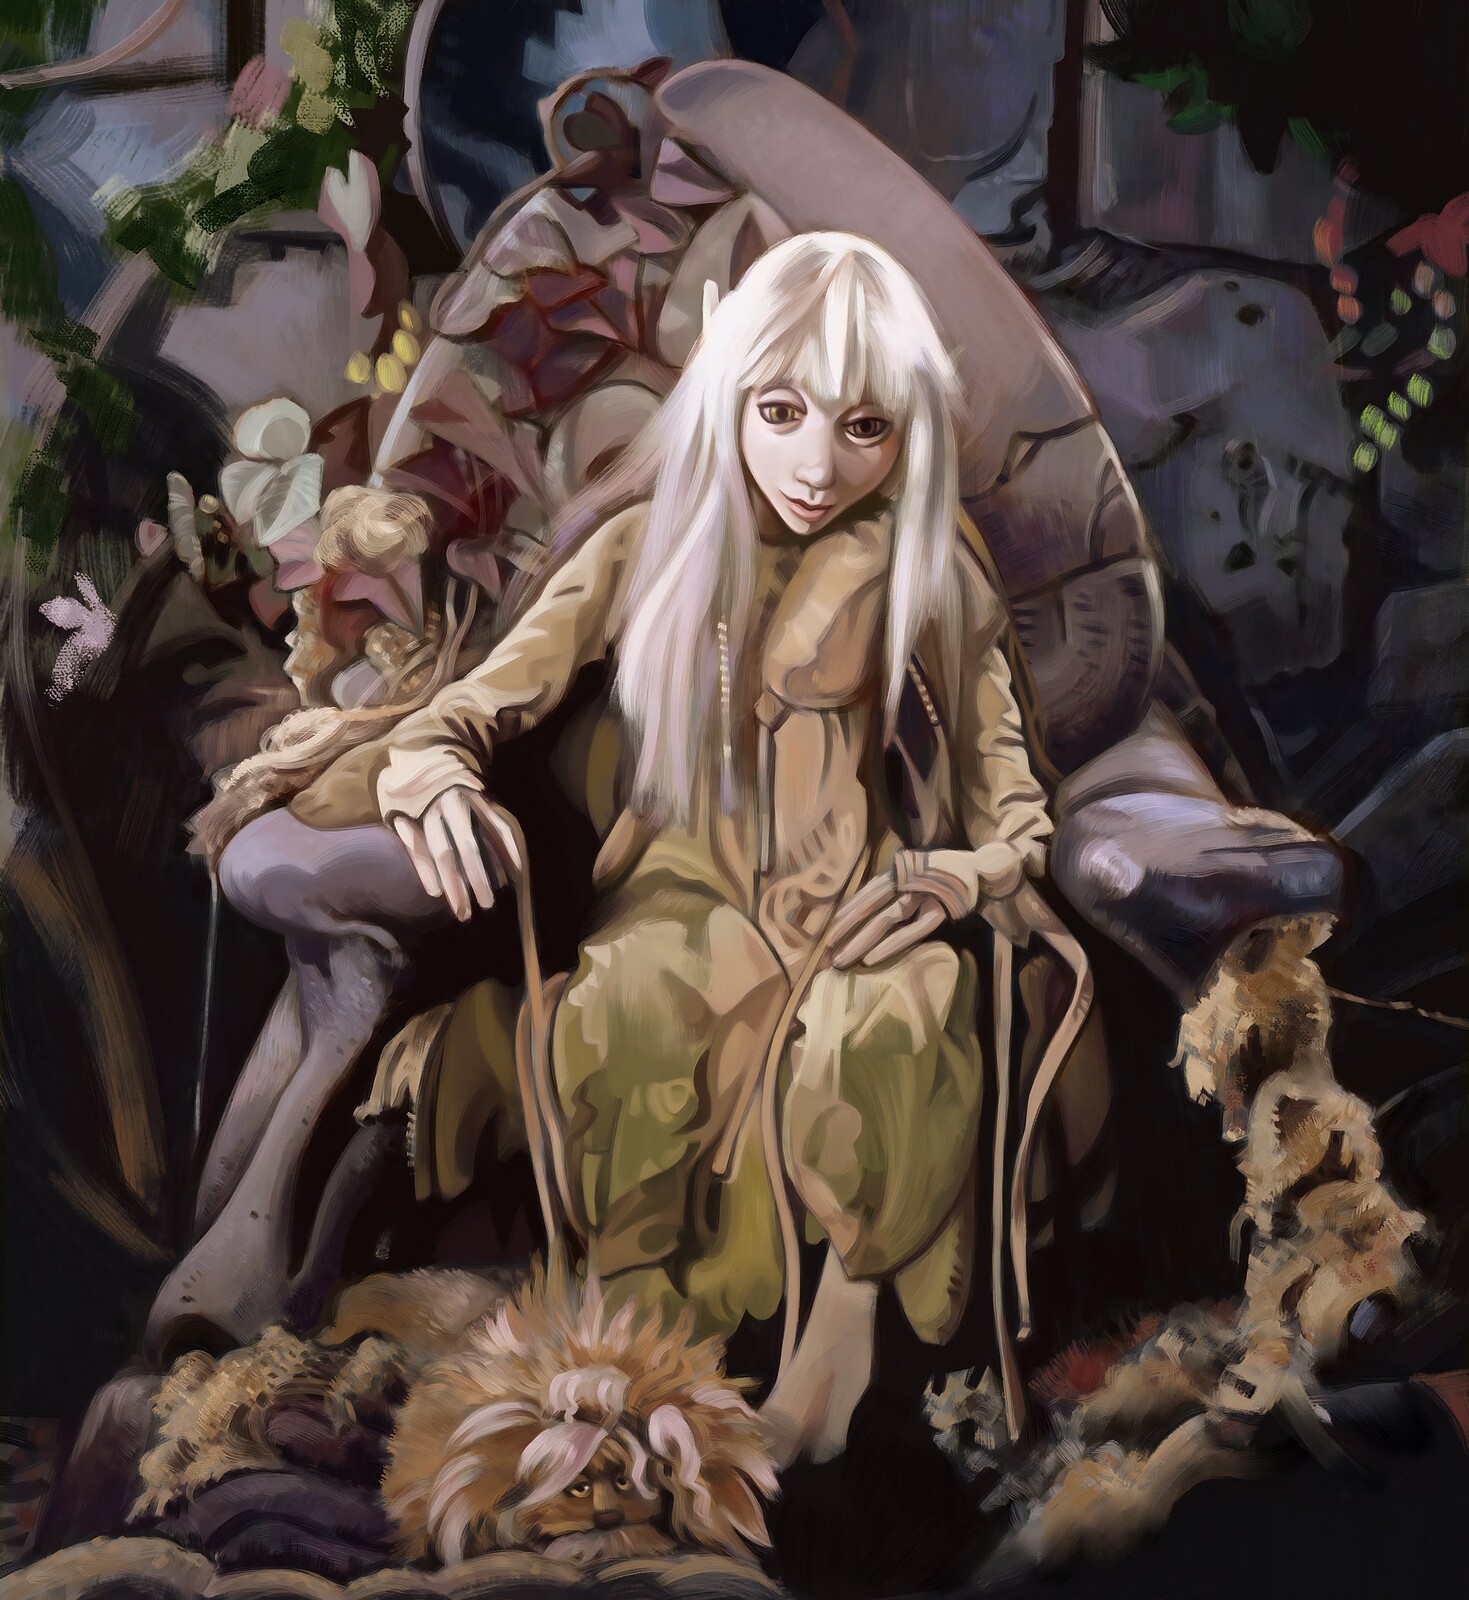 Study of Kira from the Dark Crystal